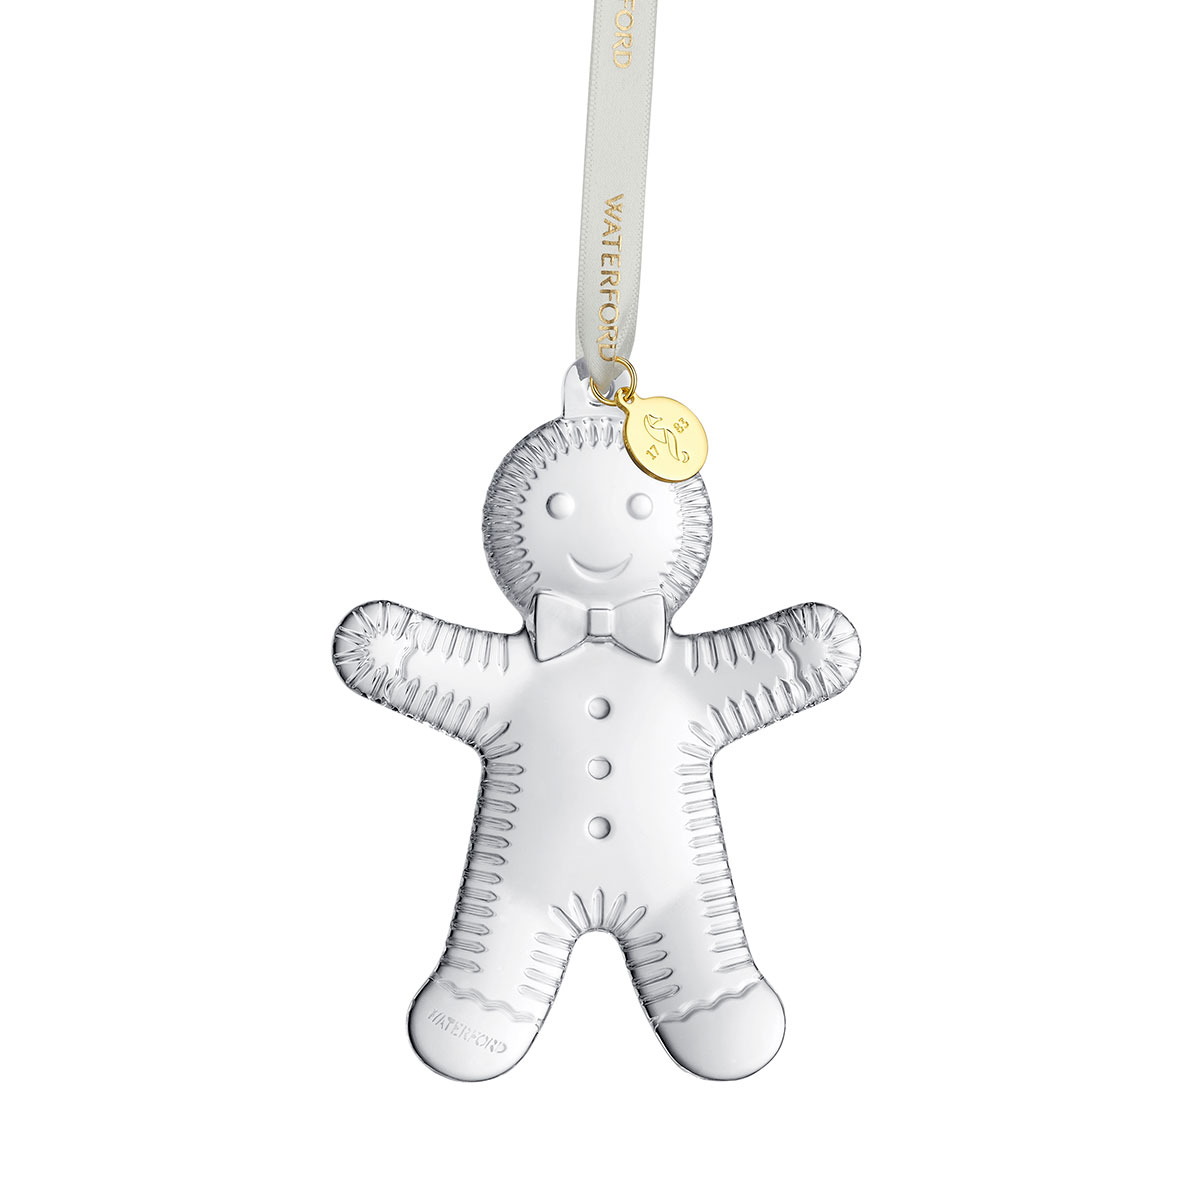 Waterford Crystal 2022 Gingerbread Man Ornament